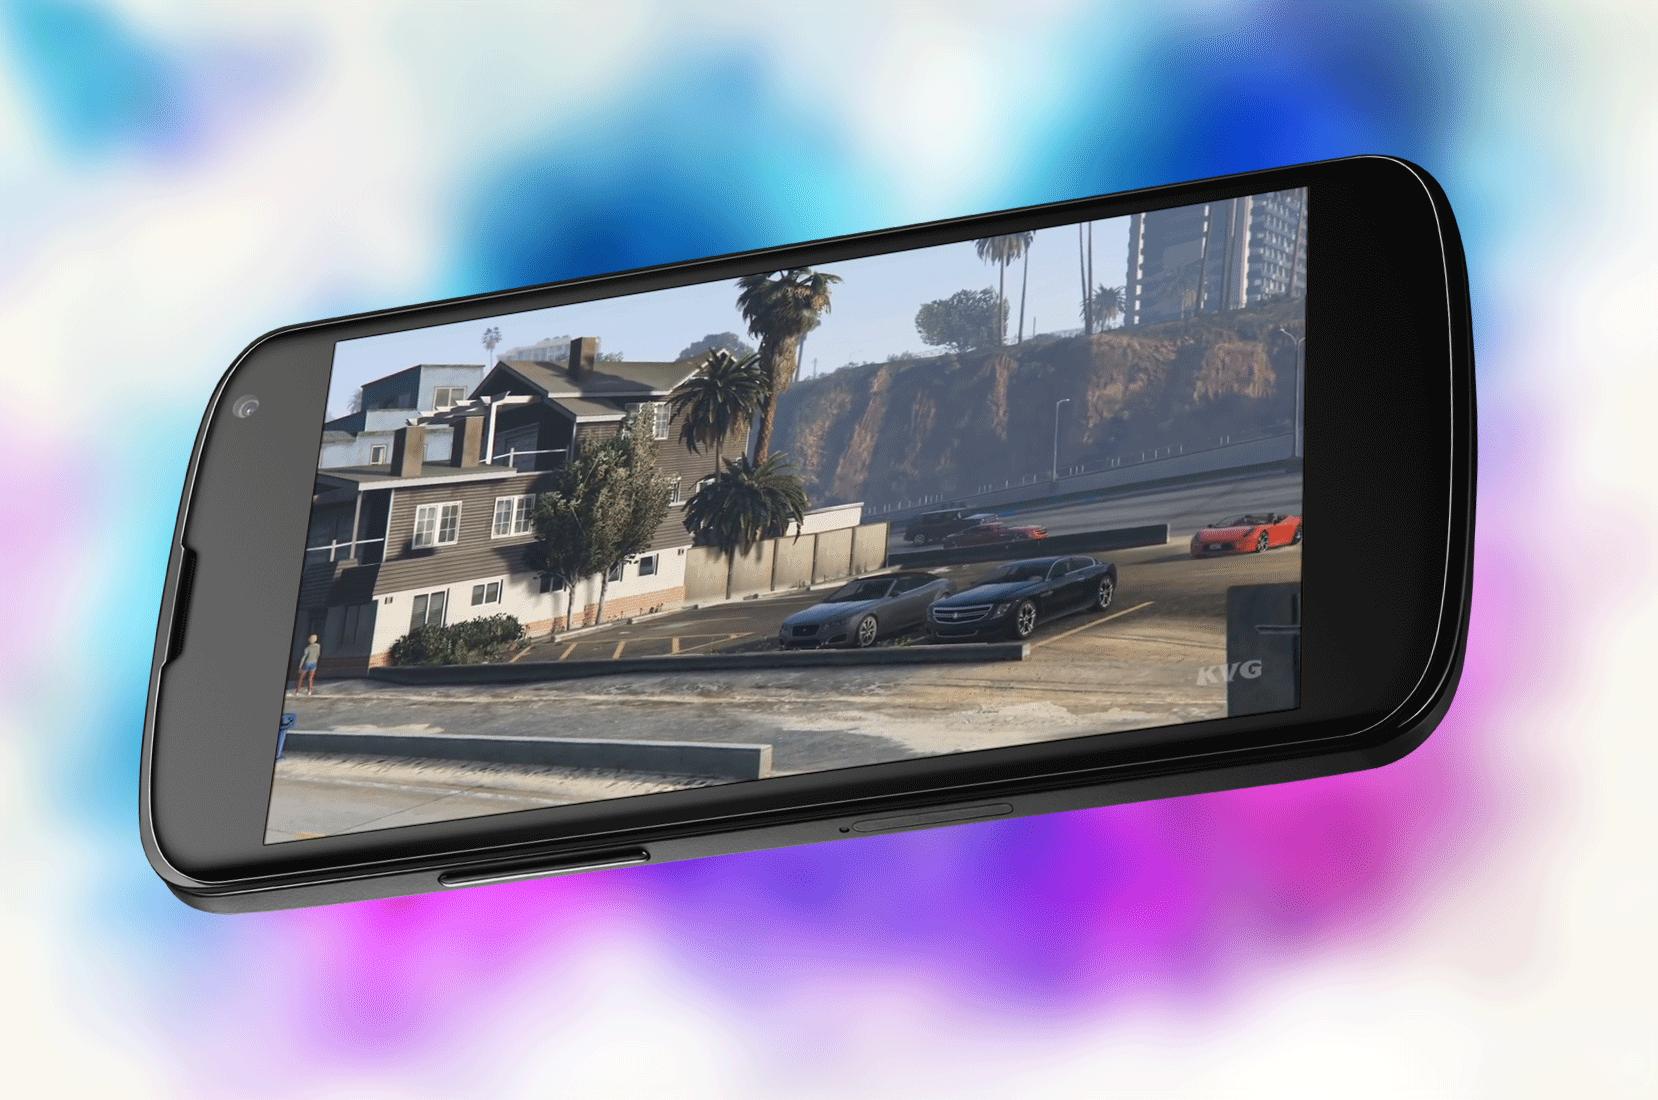 Gta v for android gta 5 for android фото 108